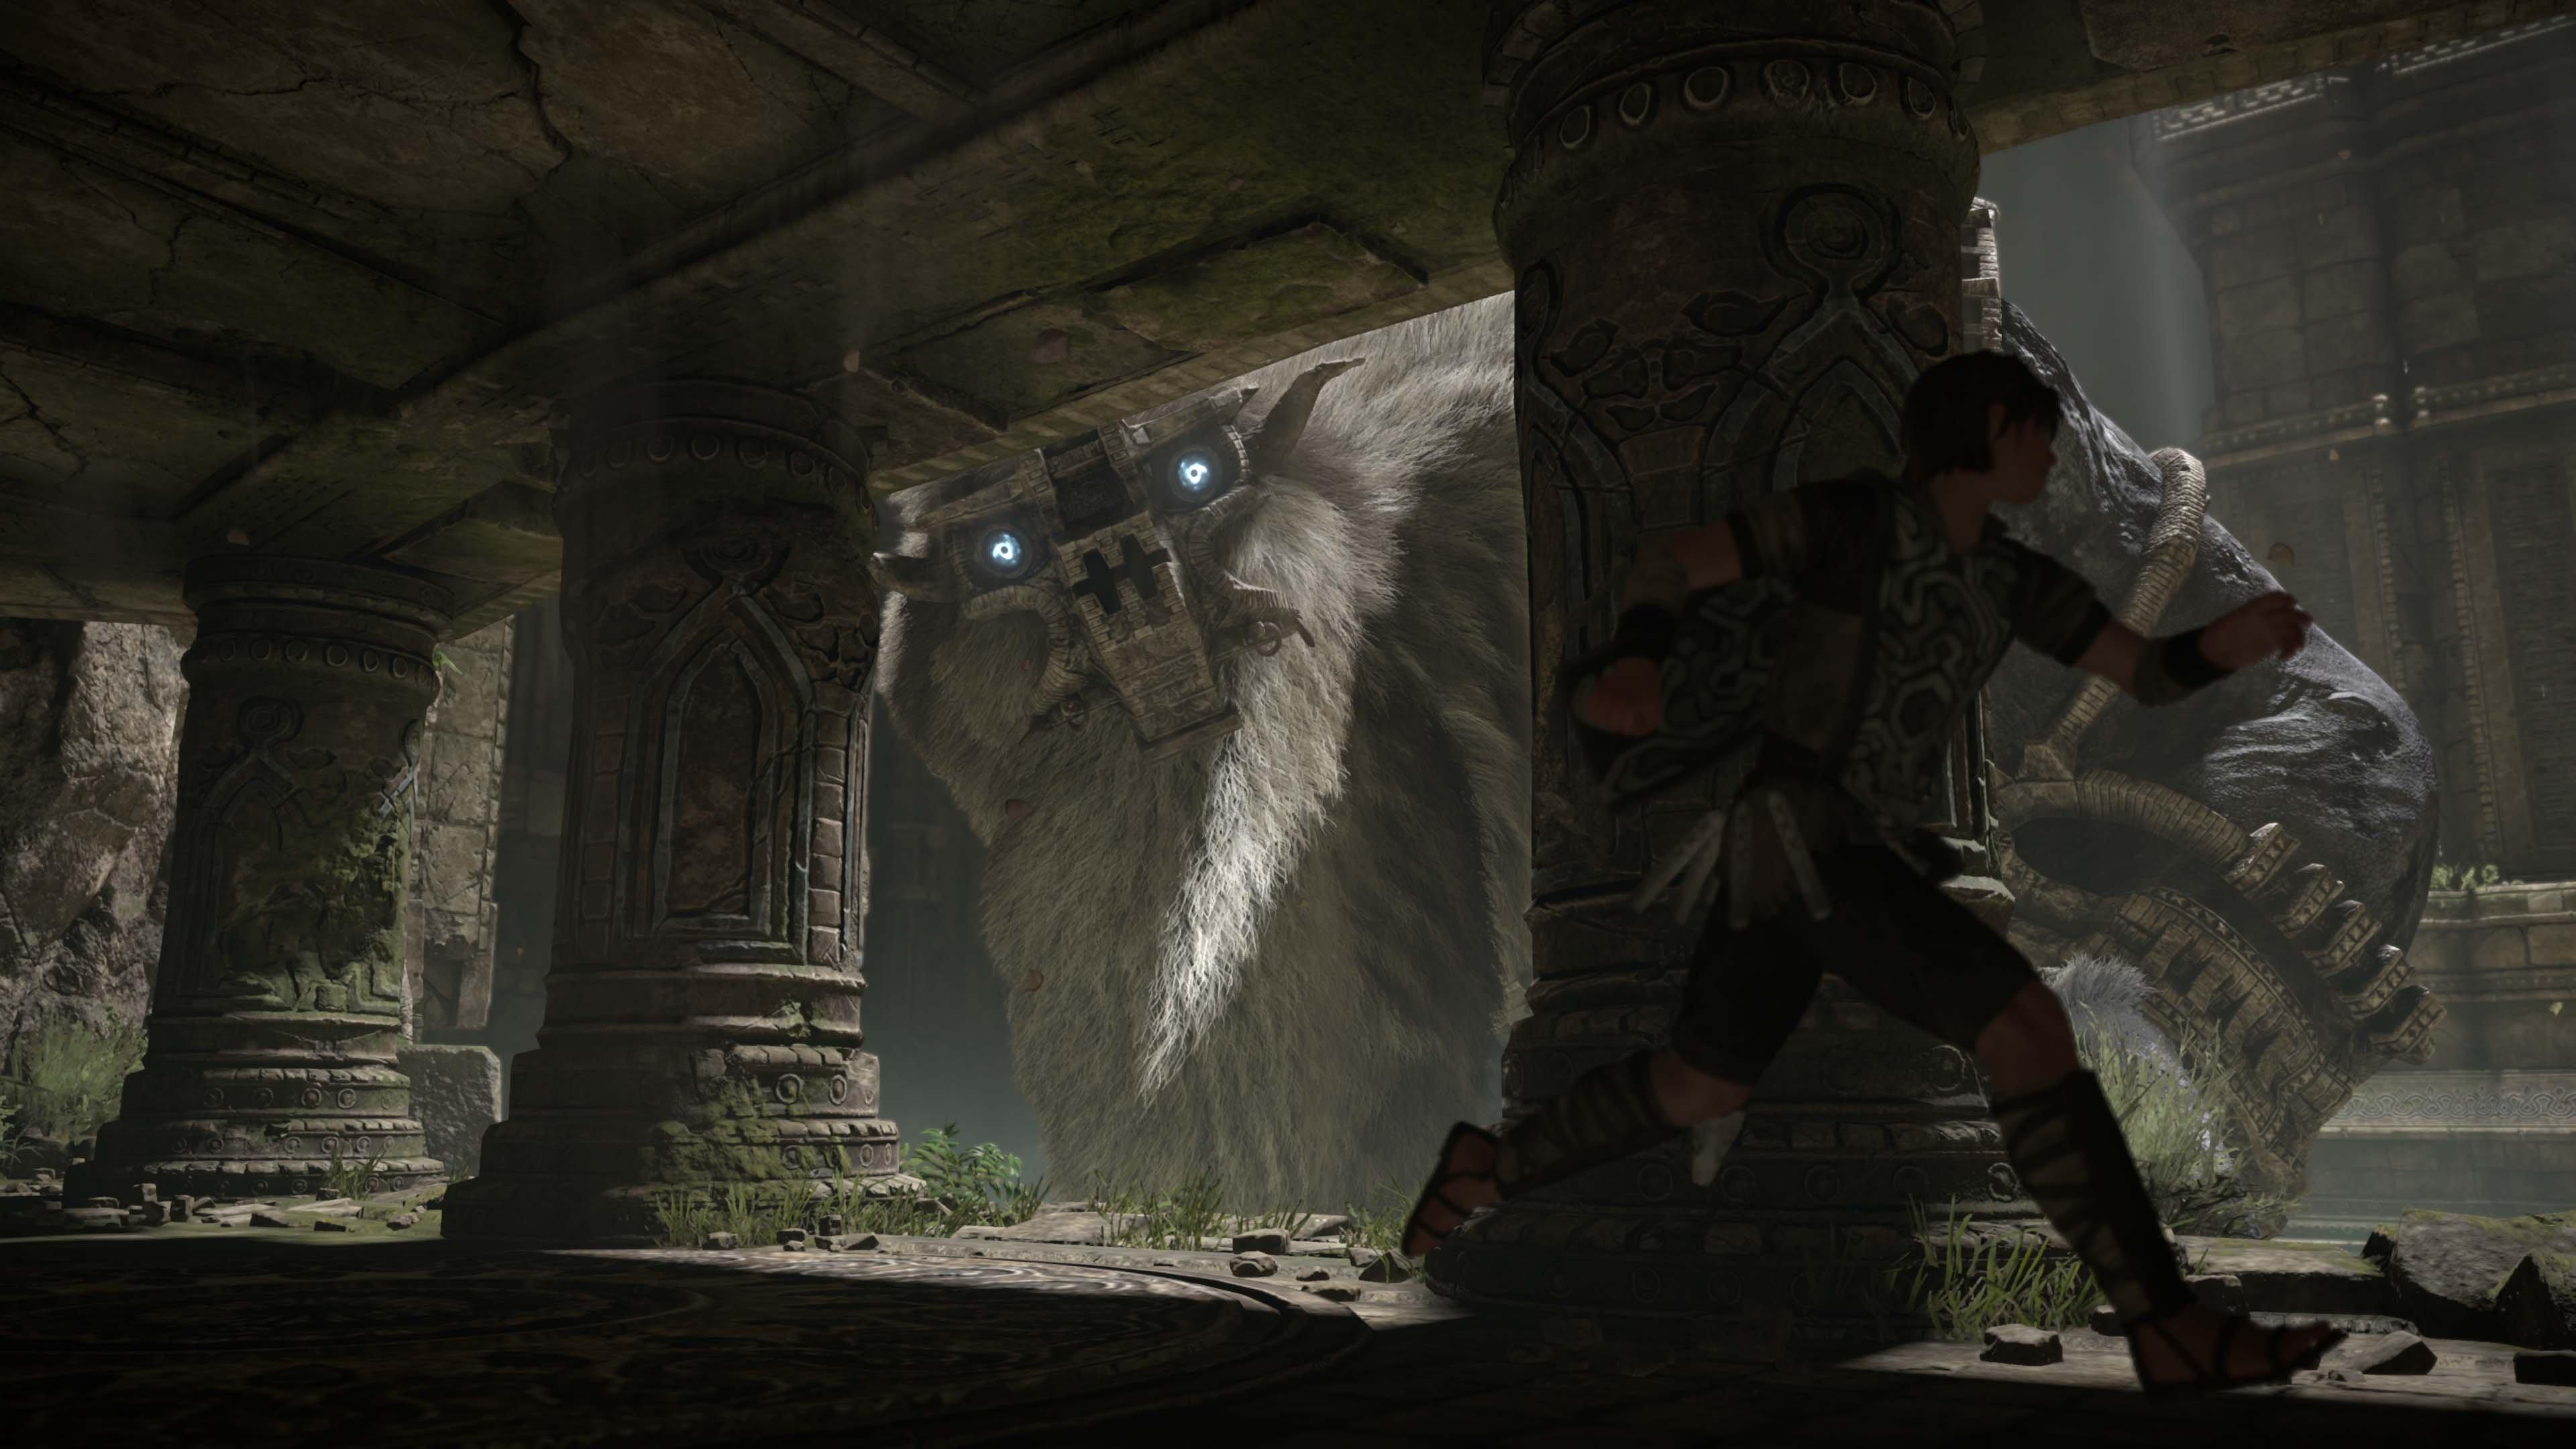 Watch New Shadow Of The Colossus PS4 Gameplay - GameSpot